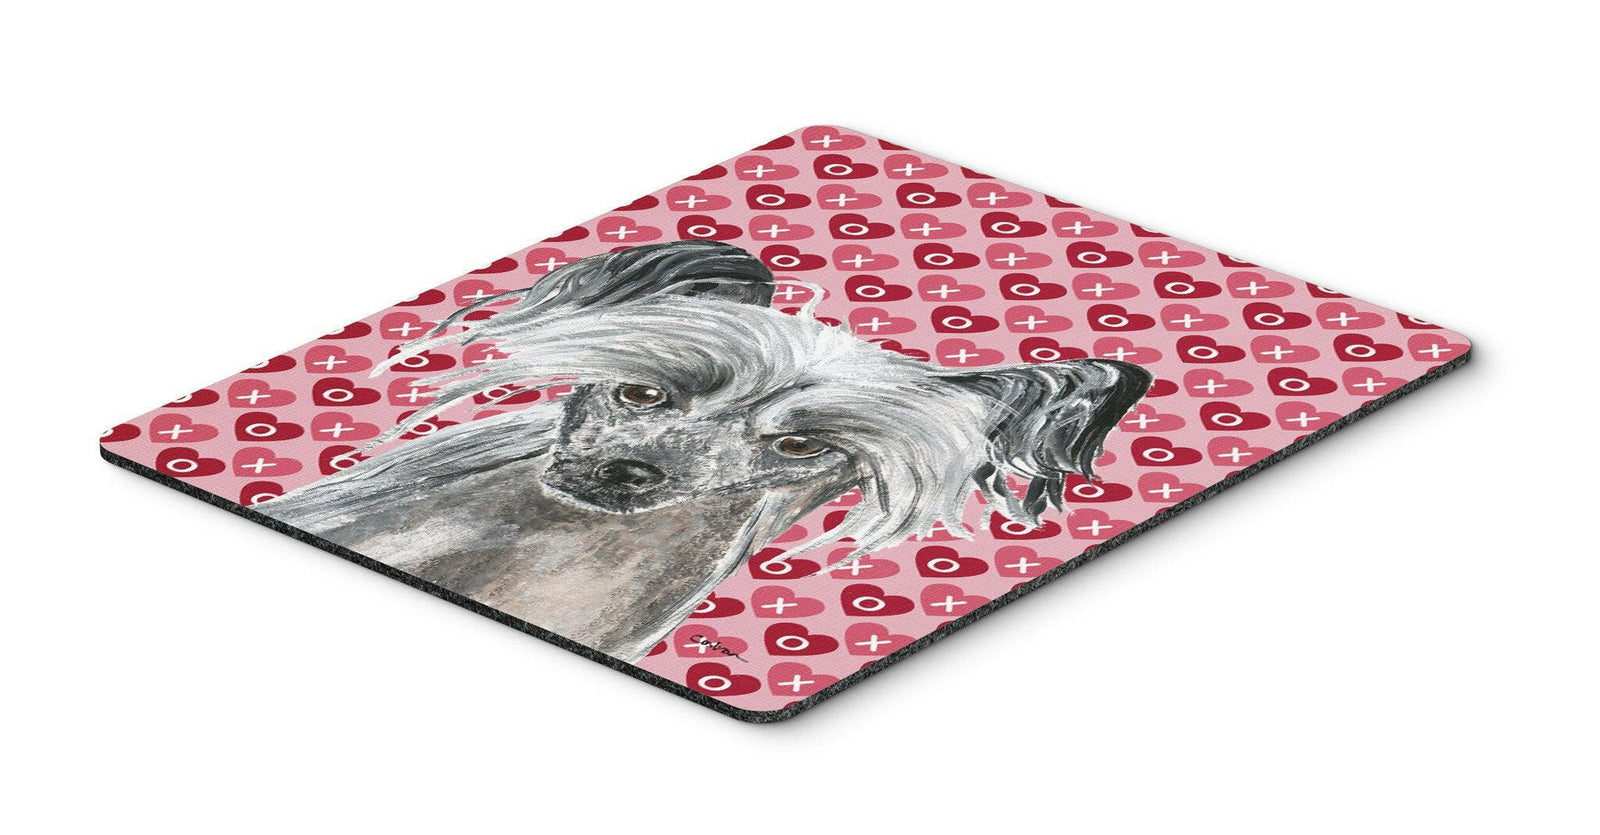 Chinese Crested Valentine's Love Mouse Pad, Hot Pad or Trivet by Caroline's Treasures